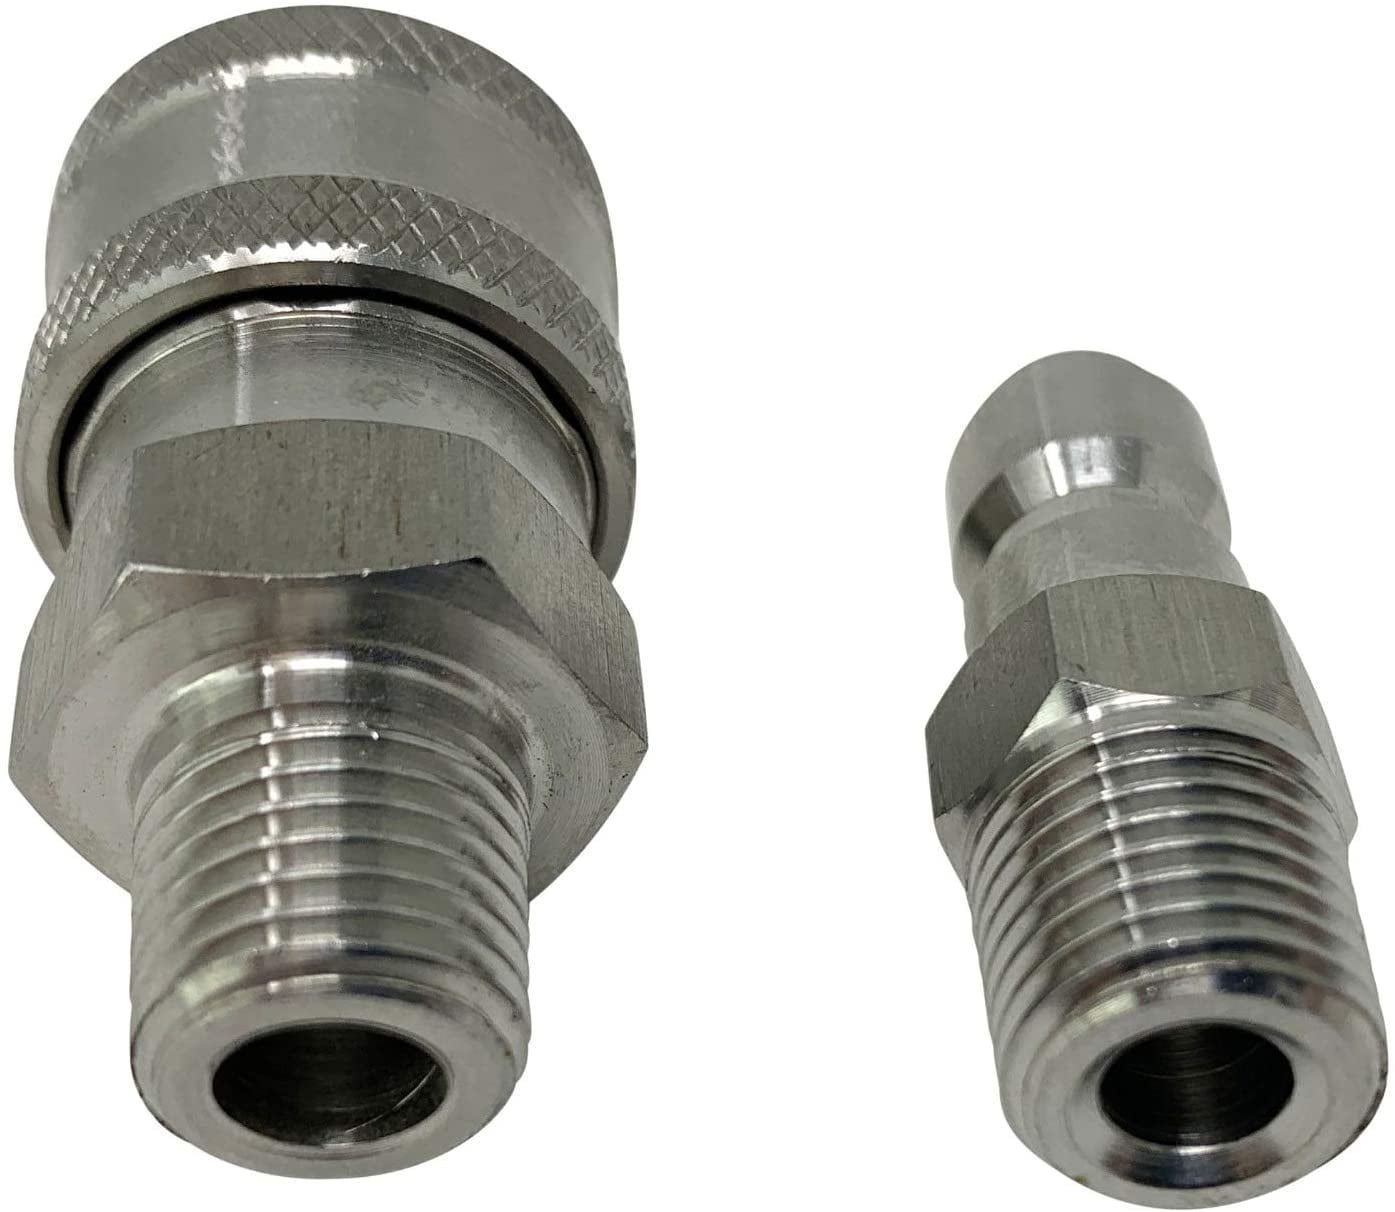 Stainless Steel Pressure Washer 1/4" NPT Male Quick Connect QC Socket Coupler 